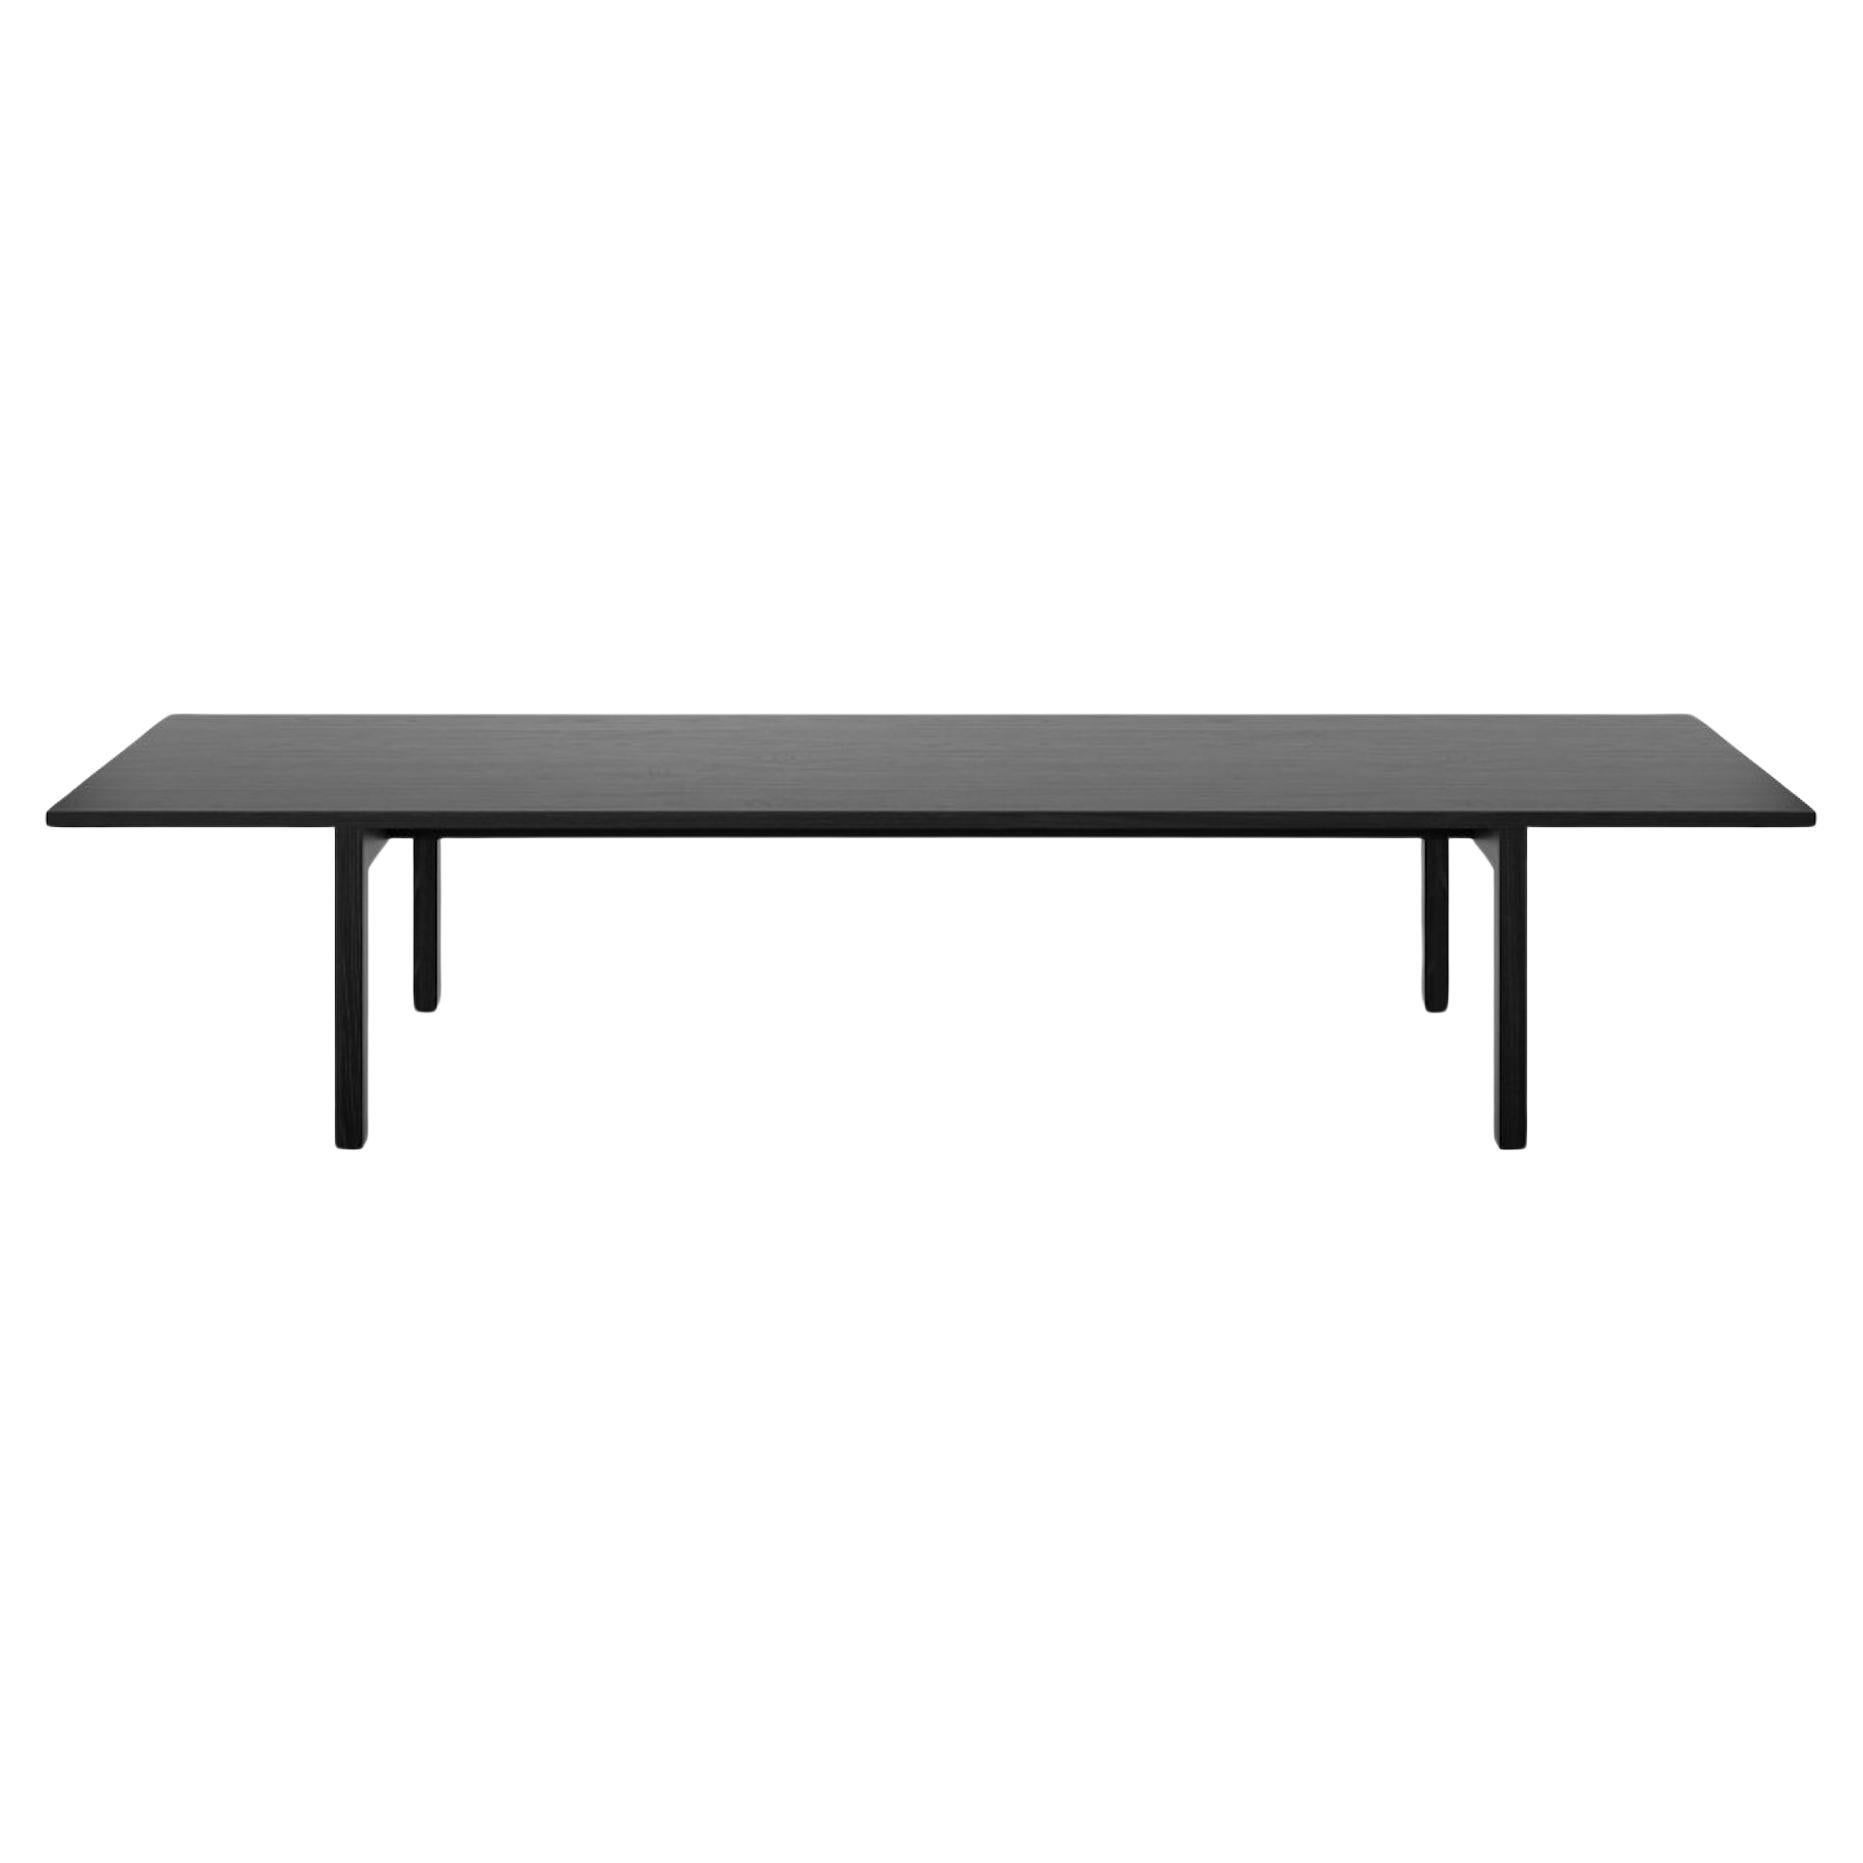 e15 Galerie Jet Black Oak Stained Table by David Chipperfield in STOCK